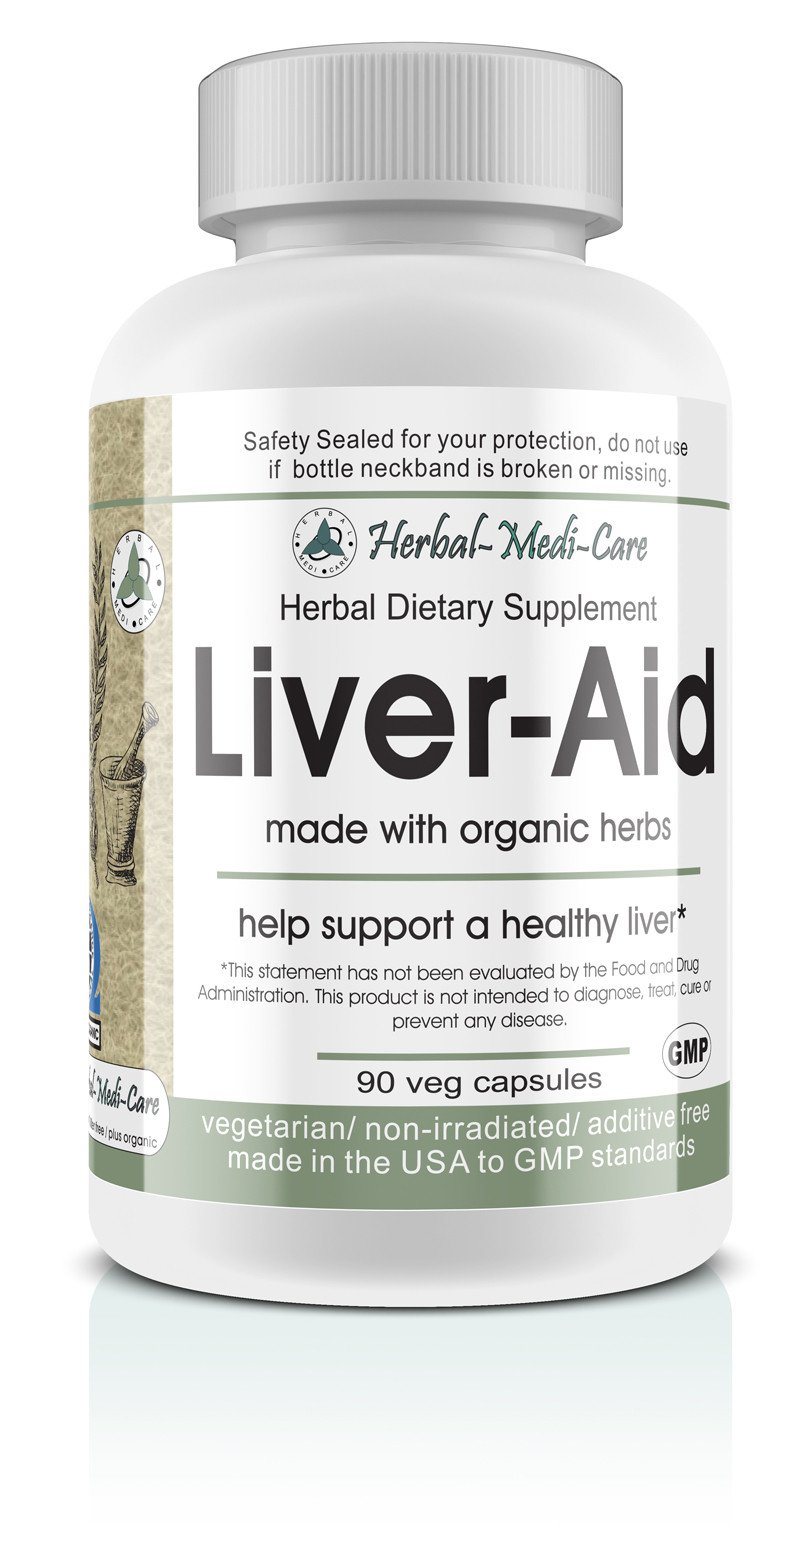 Liver protection products